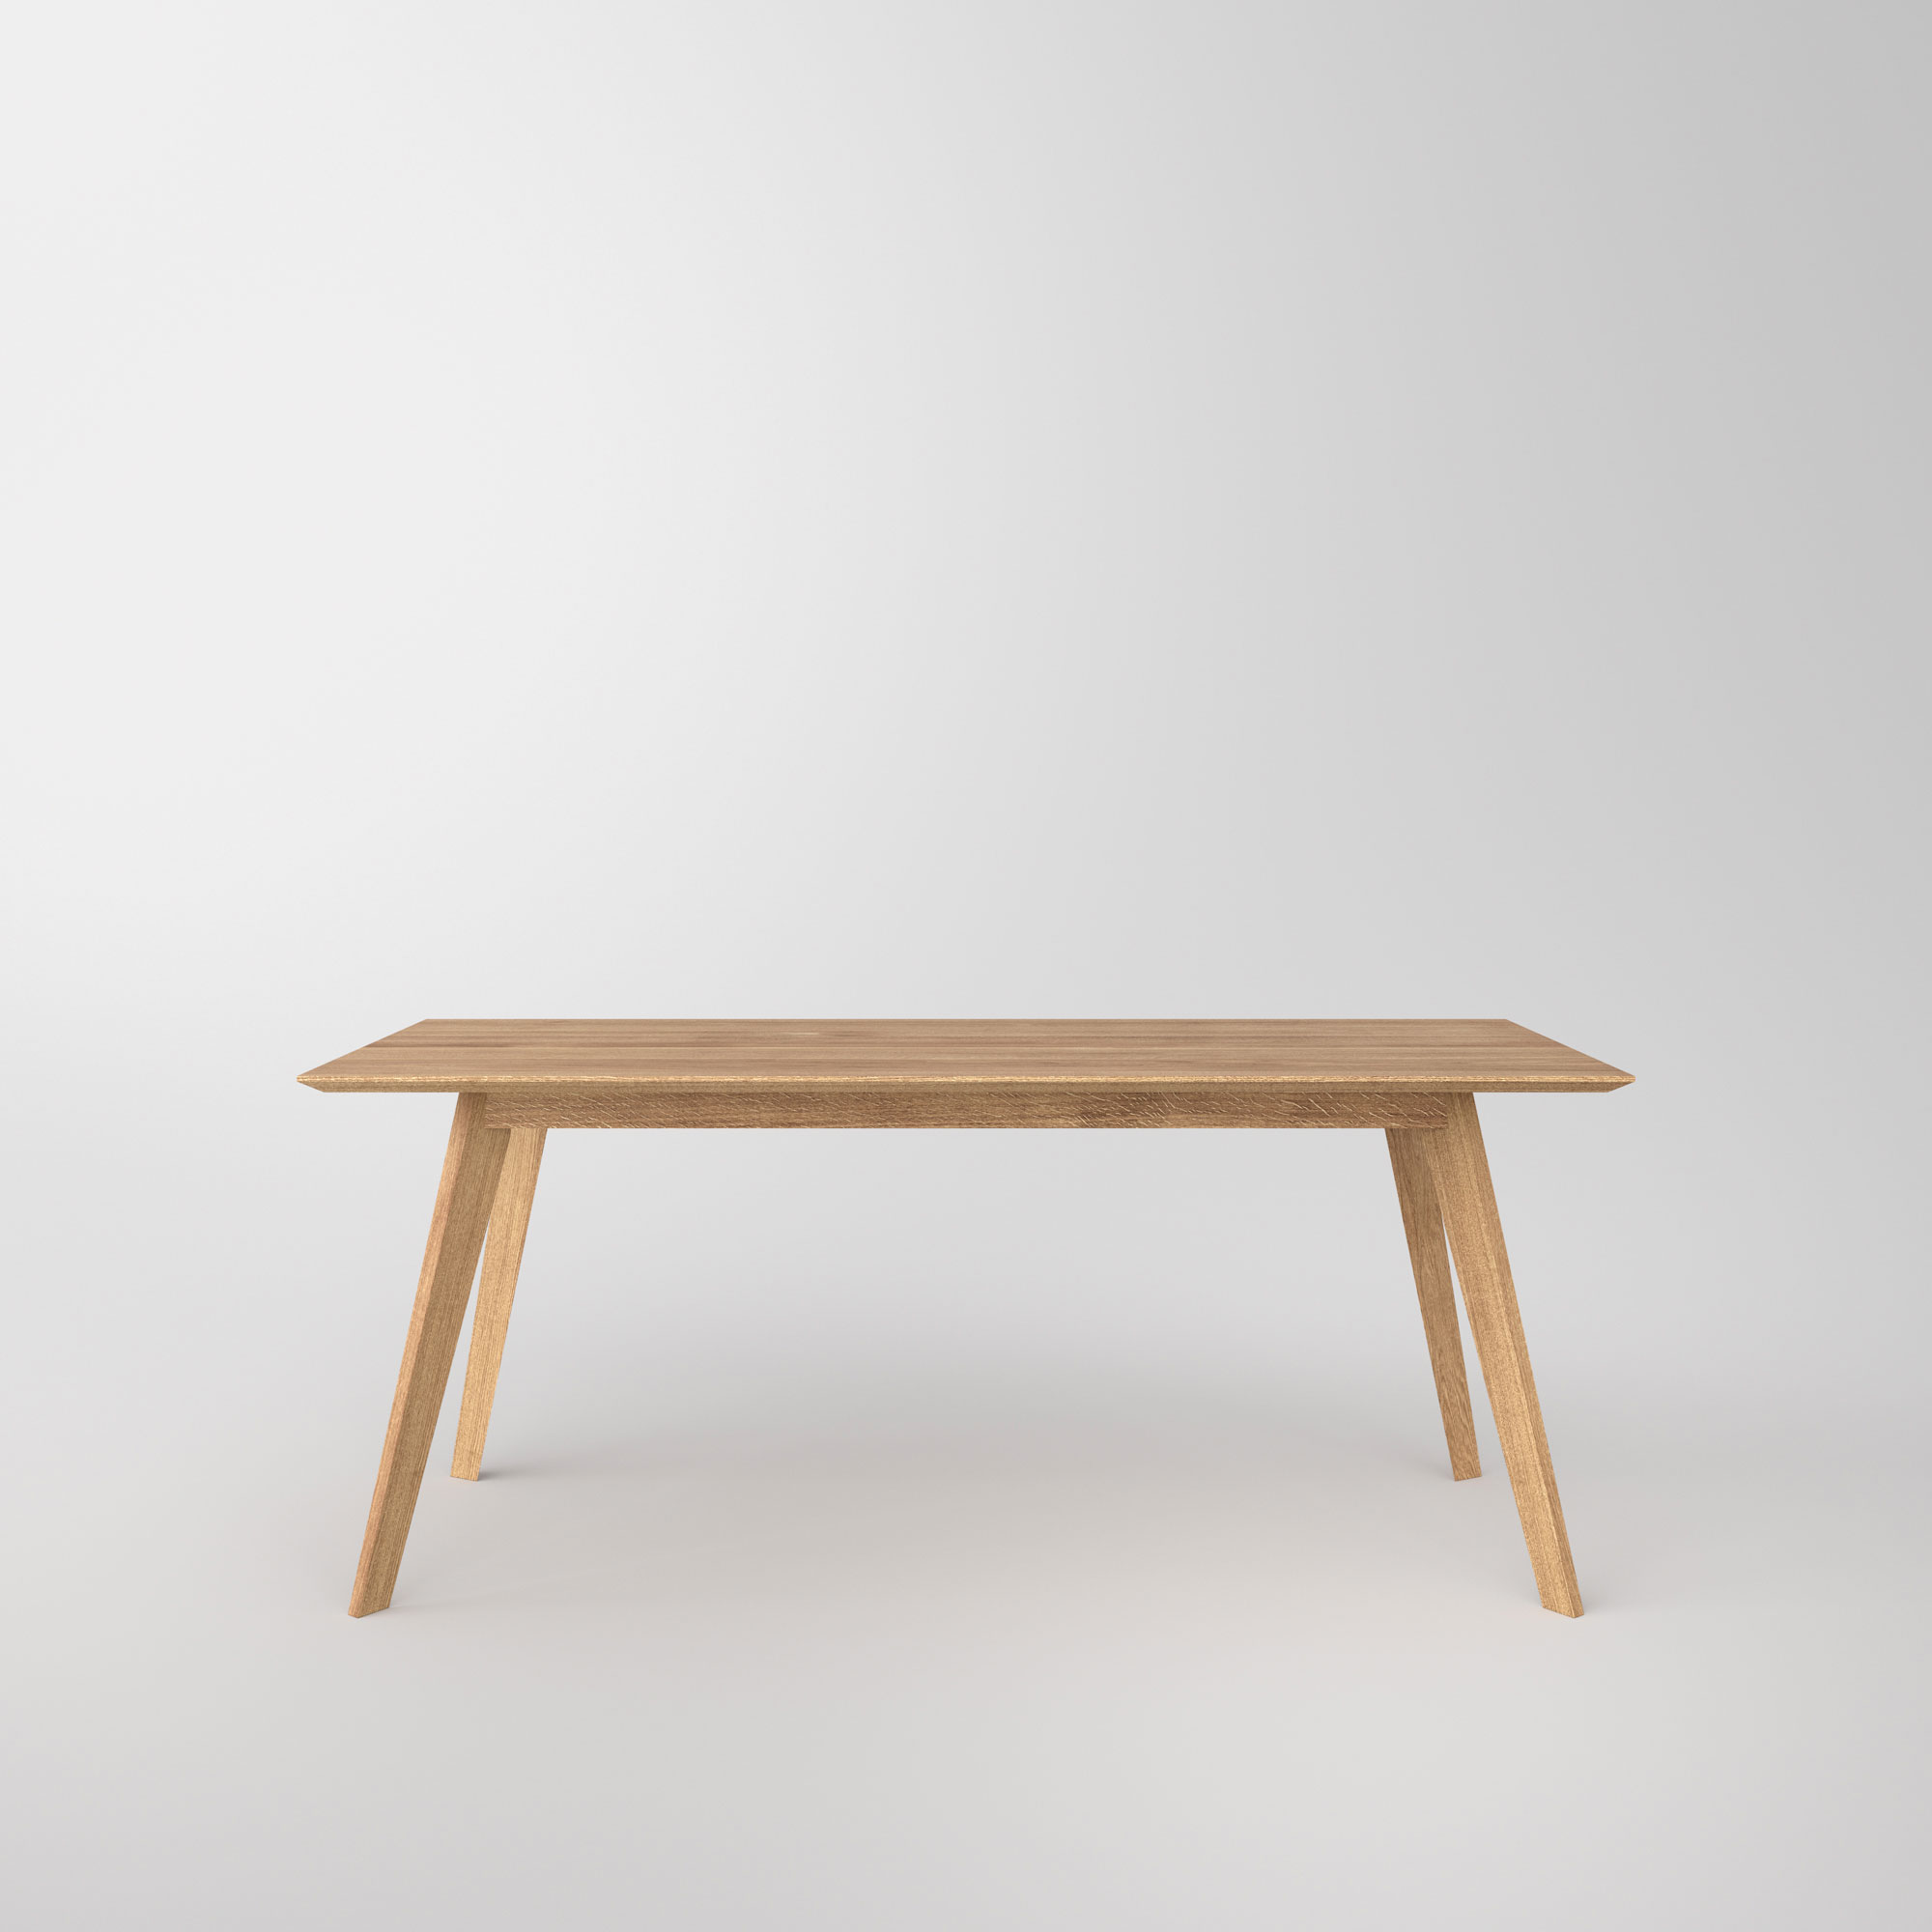 Solid Wood Dining Table CITIUS Cam3 custom made in solid wood by vitamin design